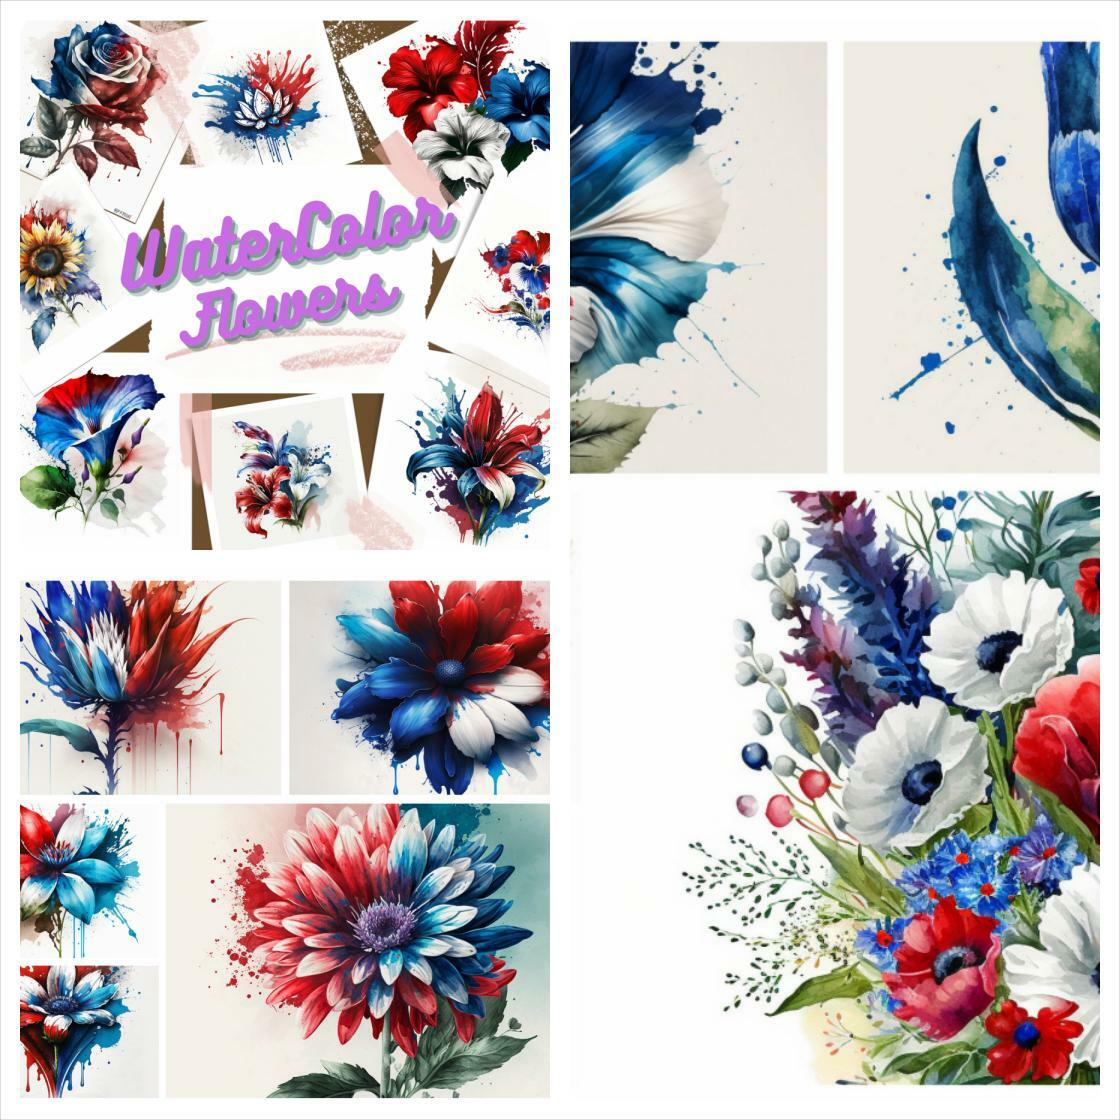 #WatercolorFlowers #FloralClipart 20 Watercolor Floral Art Set, Blossoming Flowers PNG Collection, Elegant Botanical Illustrations, Charming Floral Artwork for DIY Projects
$2.00
Get here etsy.com/listing/146993…